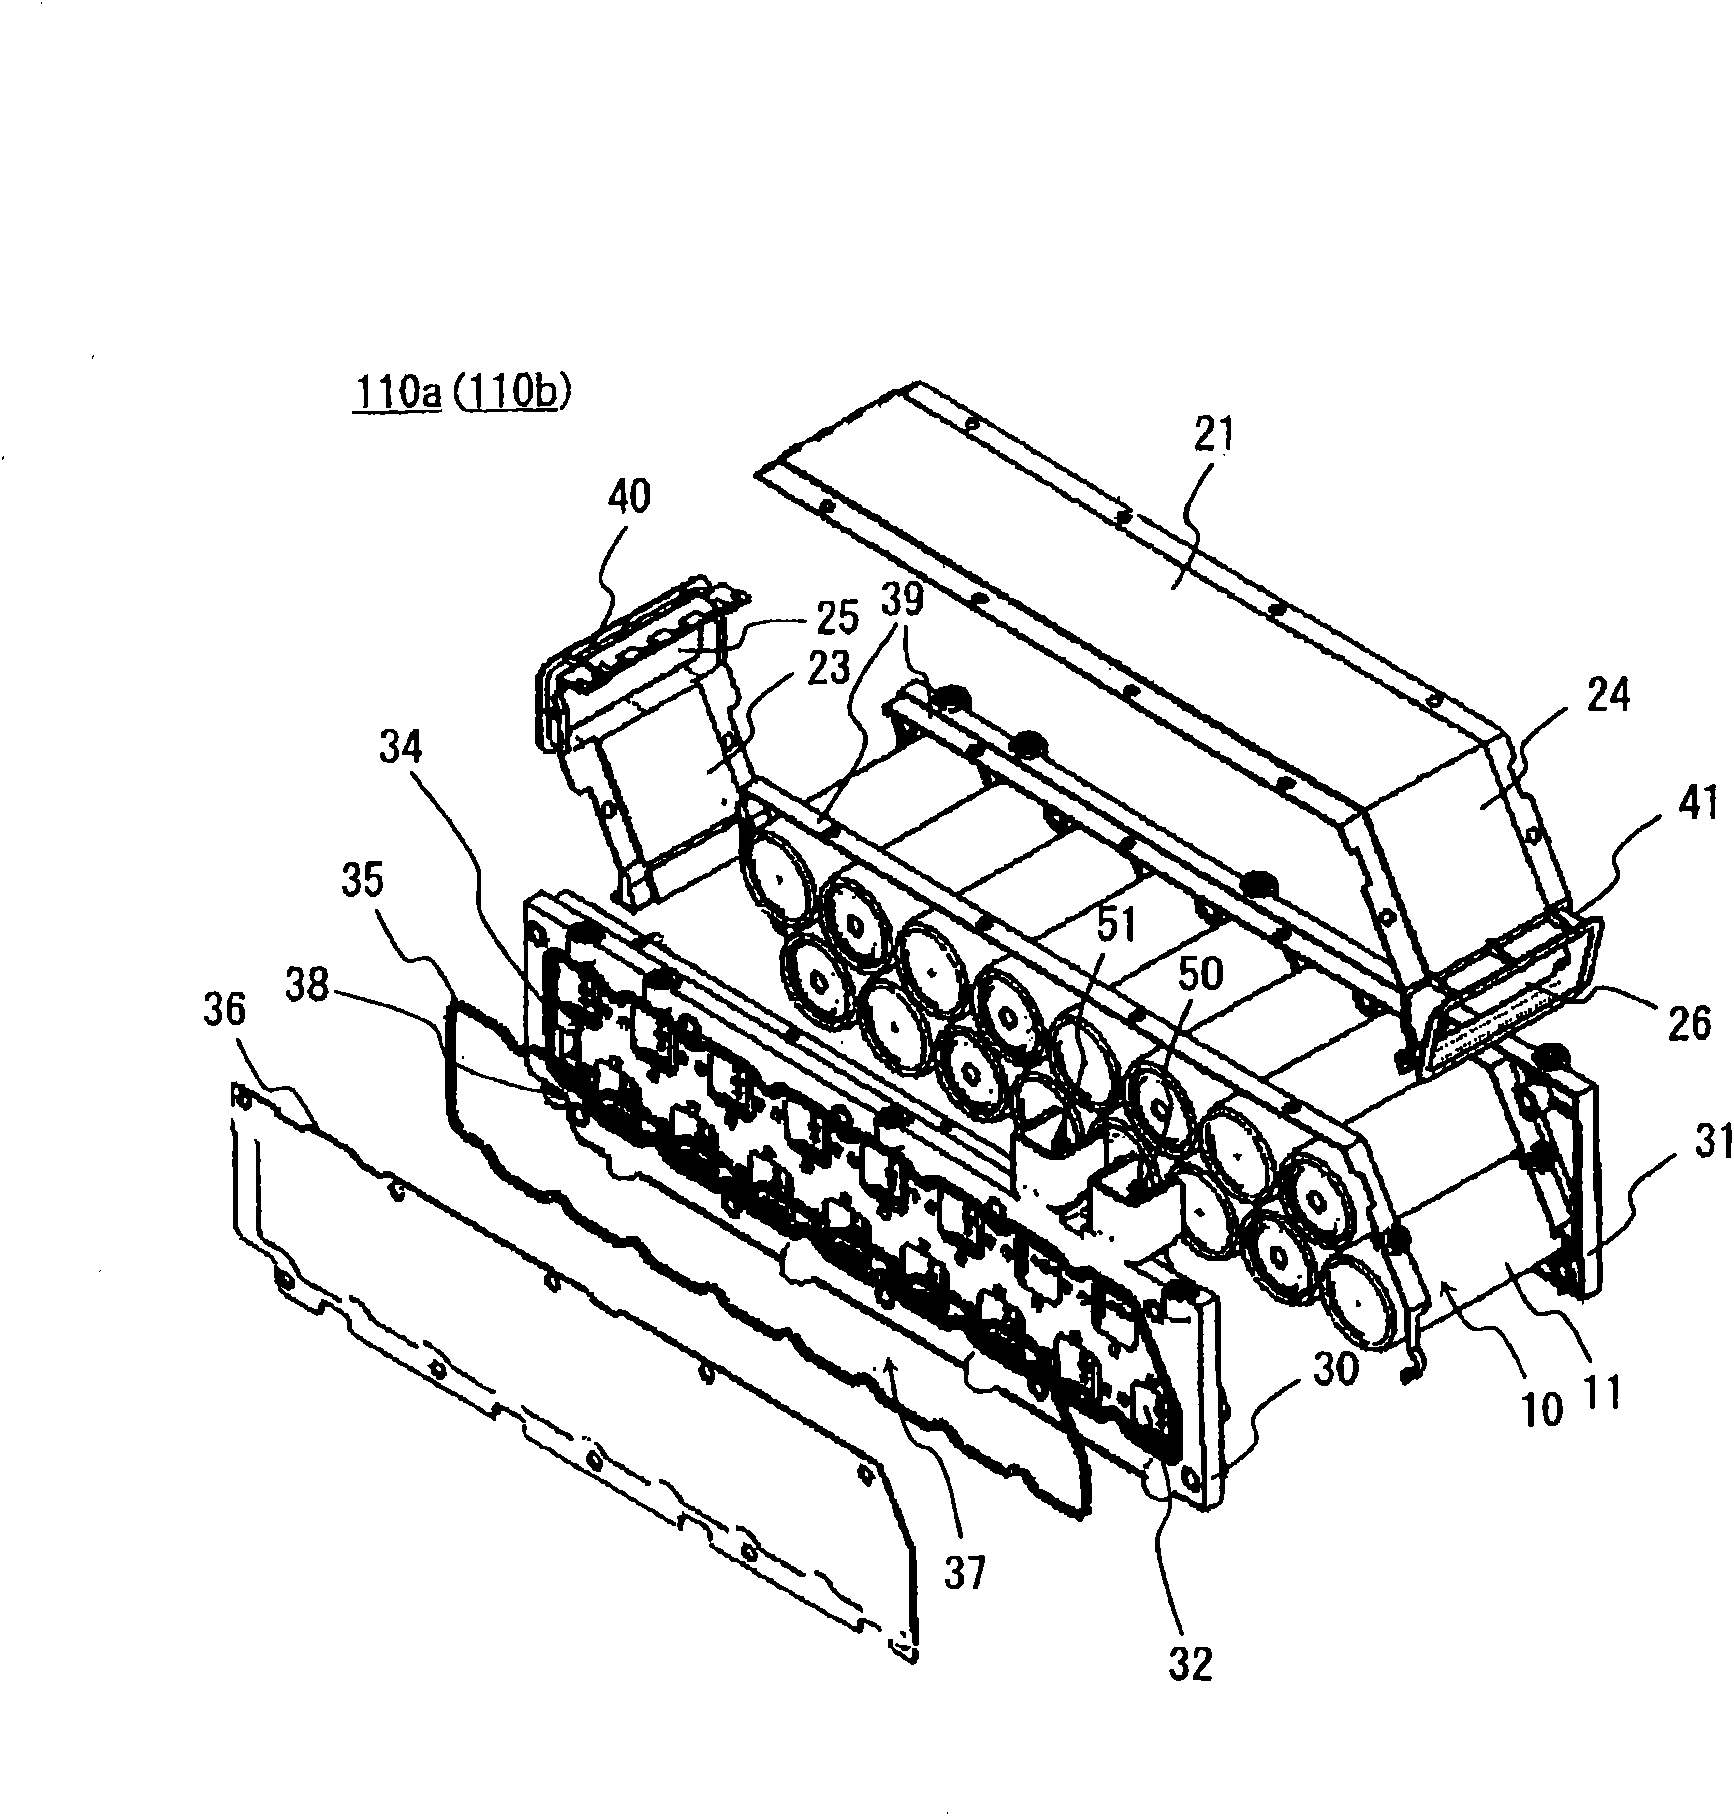 Battery module, electric storage device and electric system